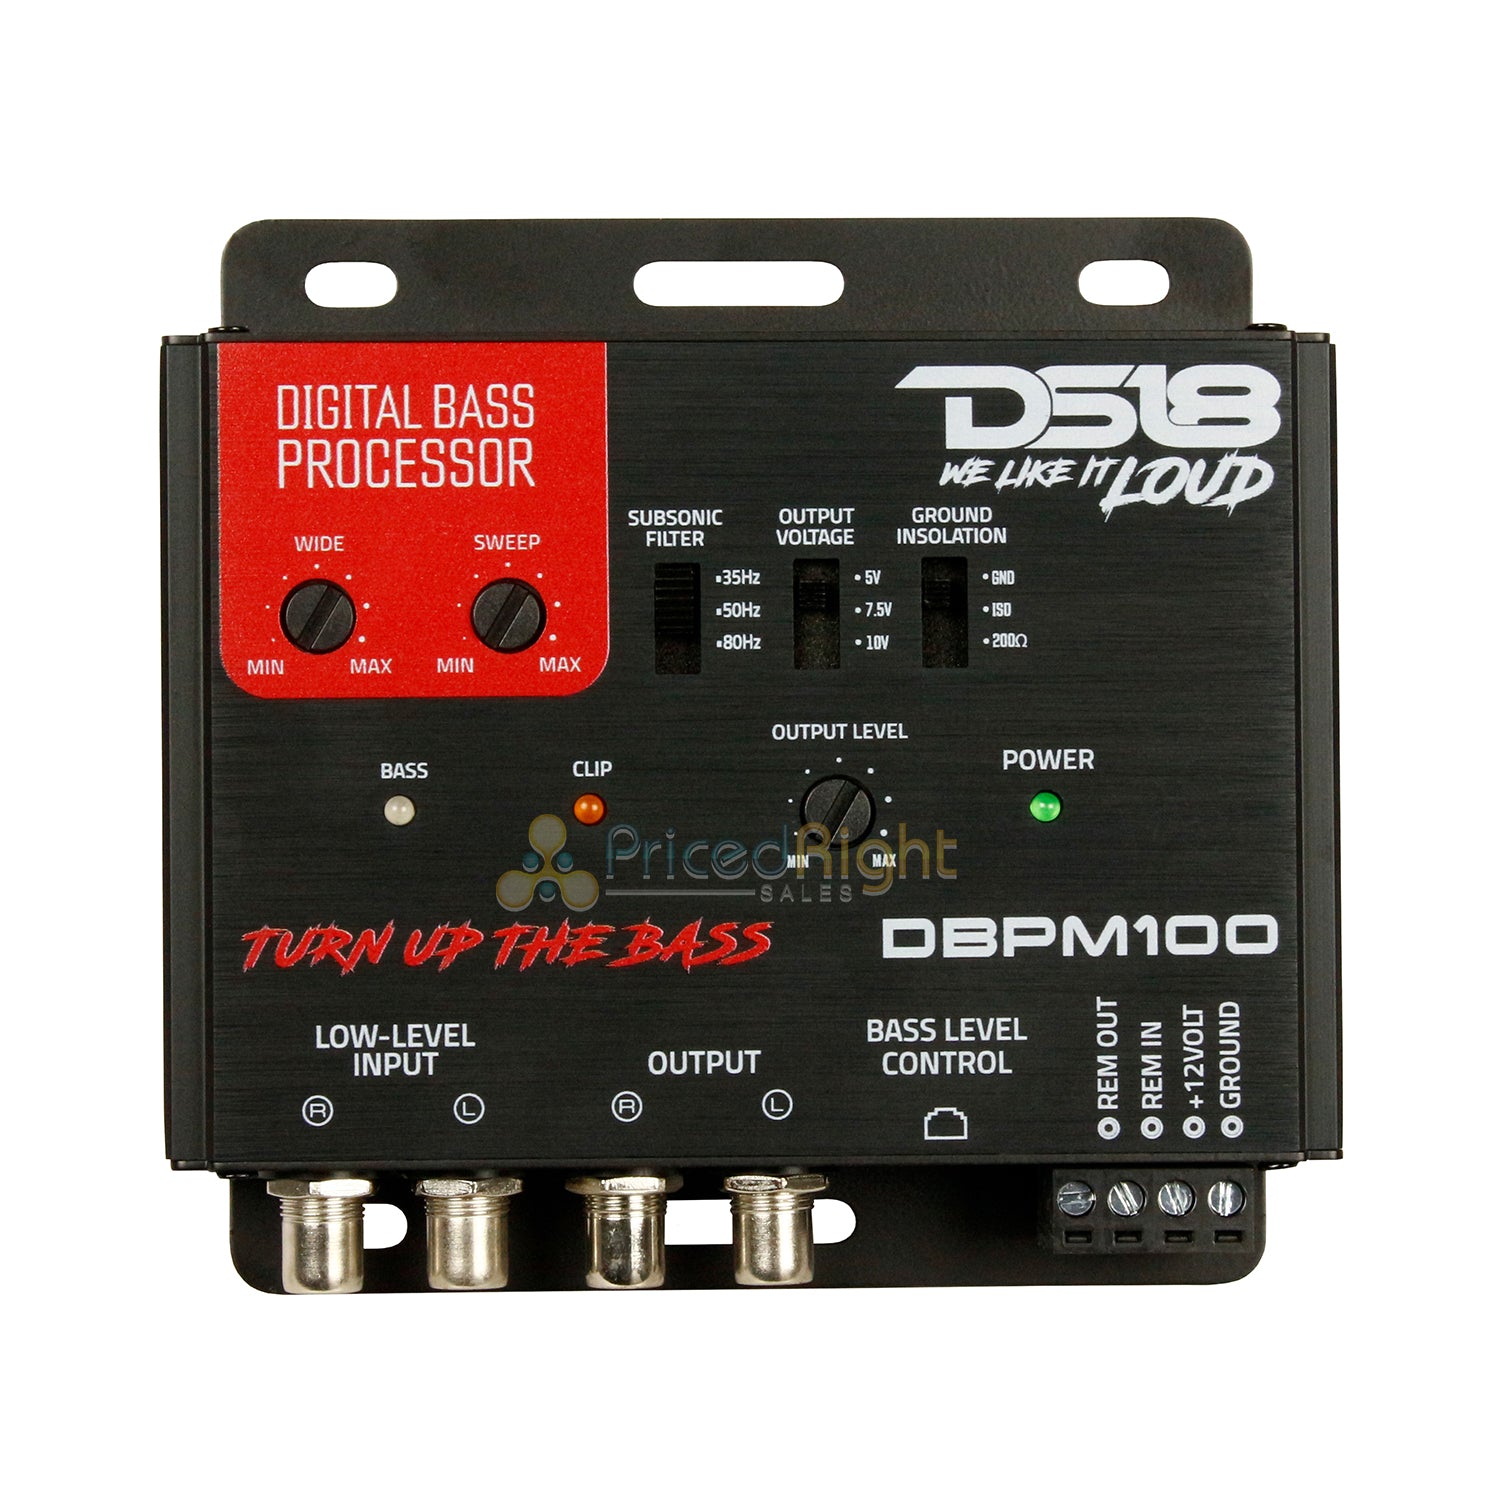 DS18 Compact Digital Bass Processor 2 Channel Preamp Input Output Black DBPM100